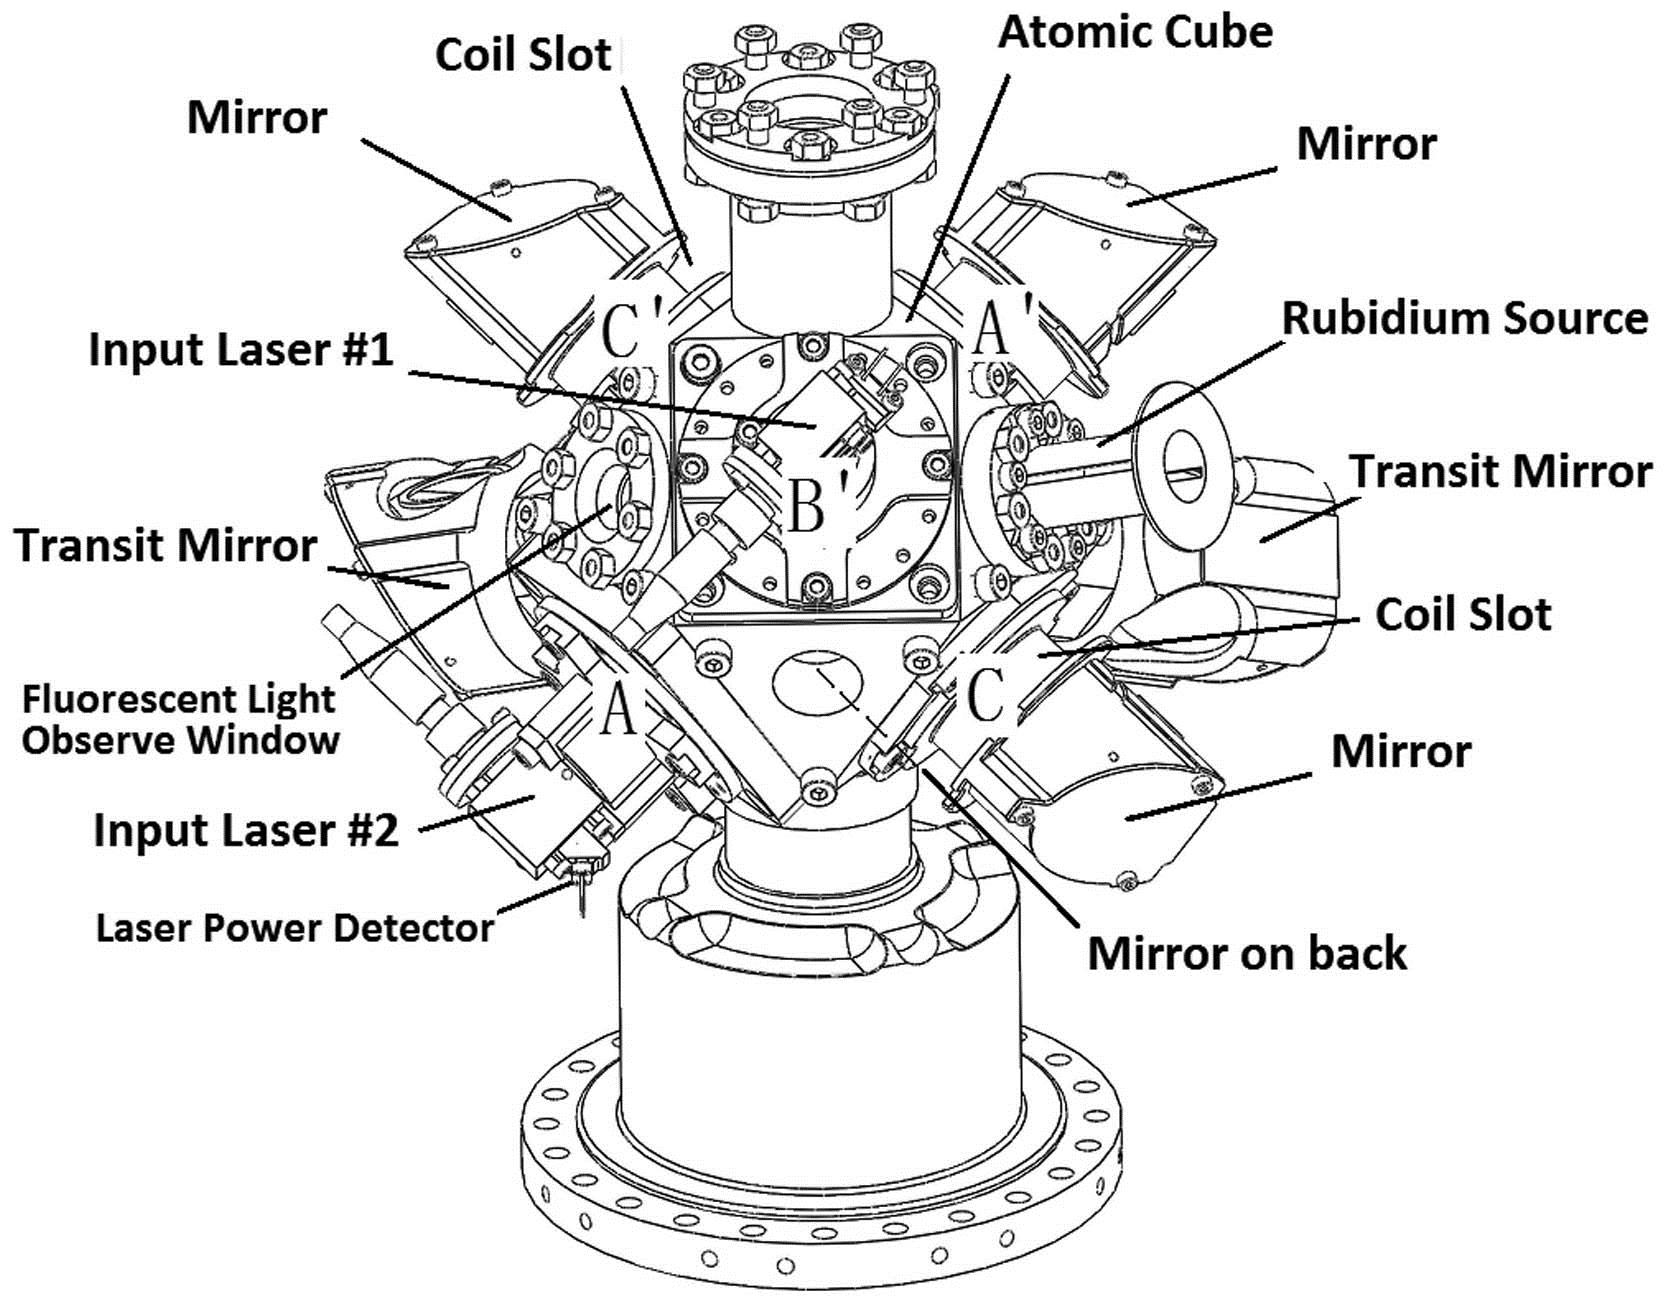 Set of the CMOT mechanism. The up and down flanges are separately connected with ion pumps and an atomic clock chamber k.